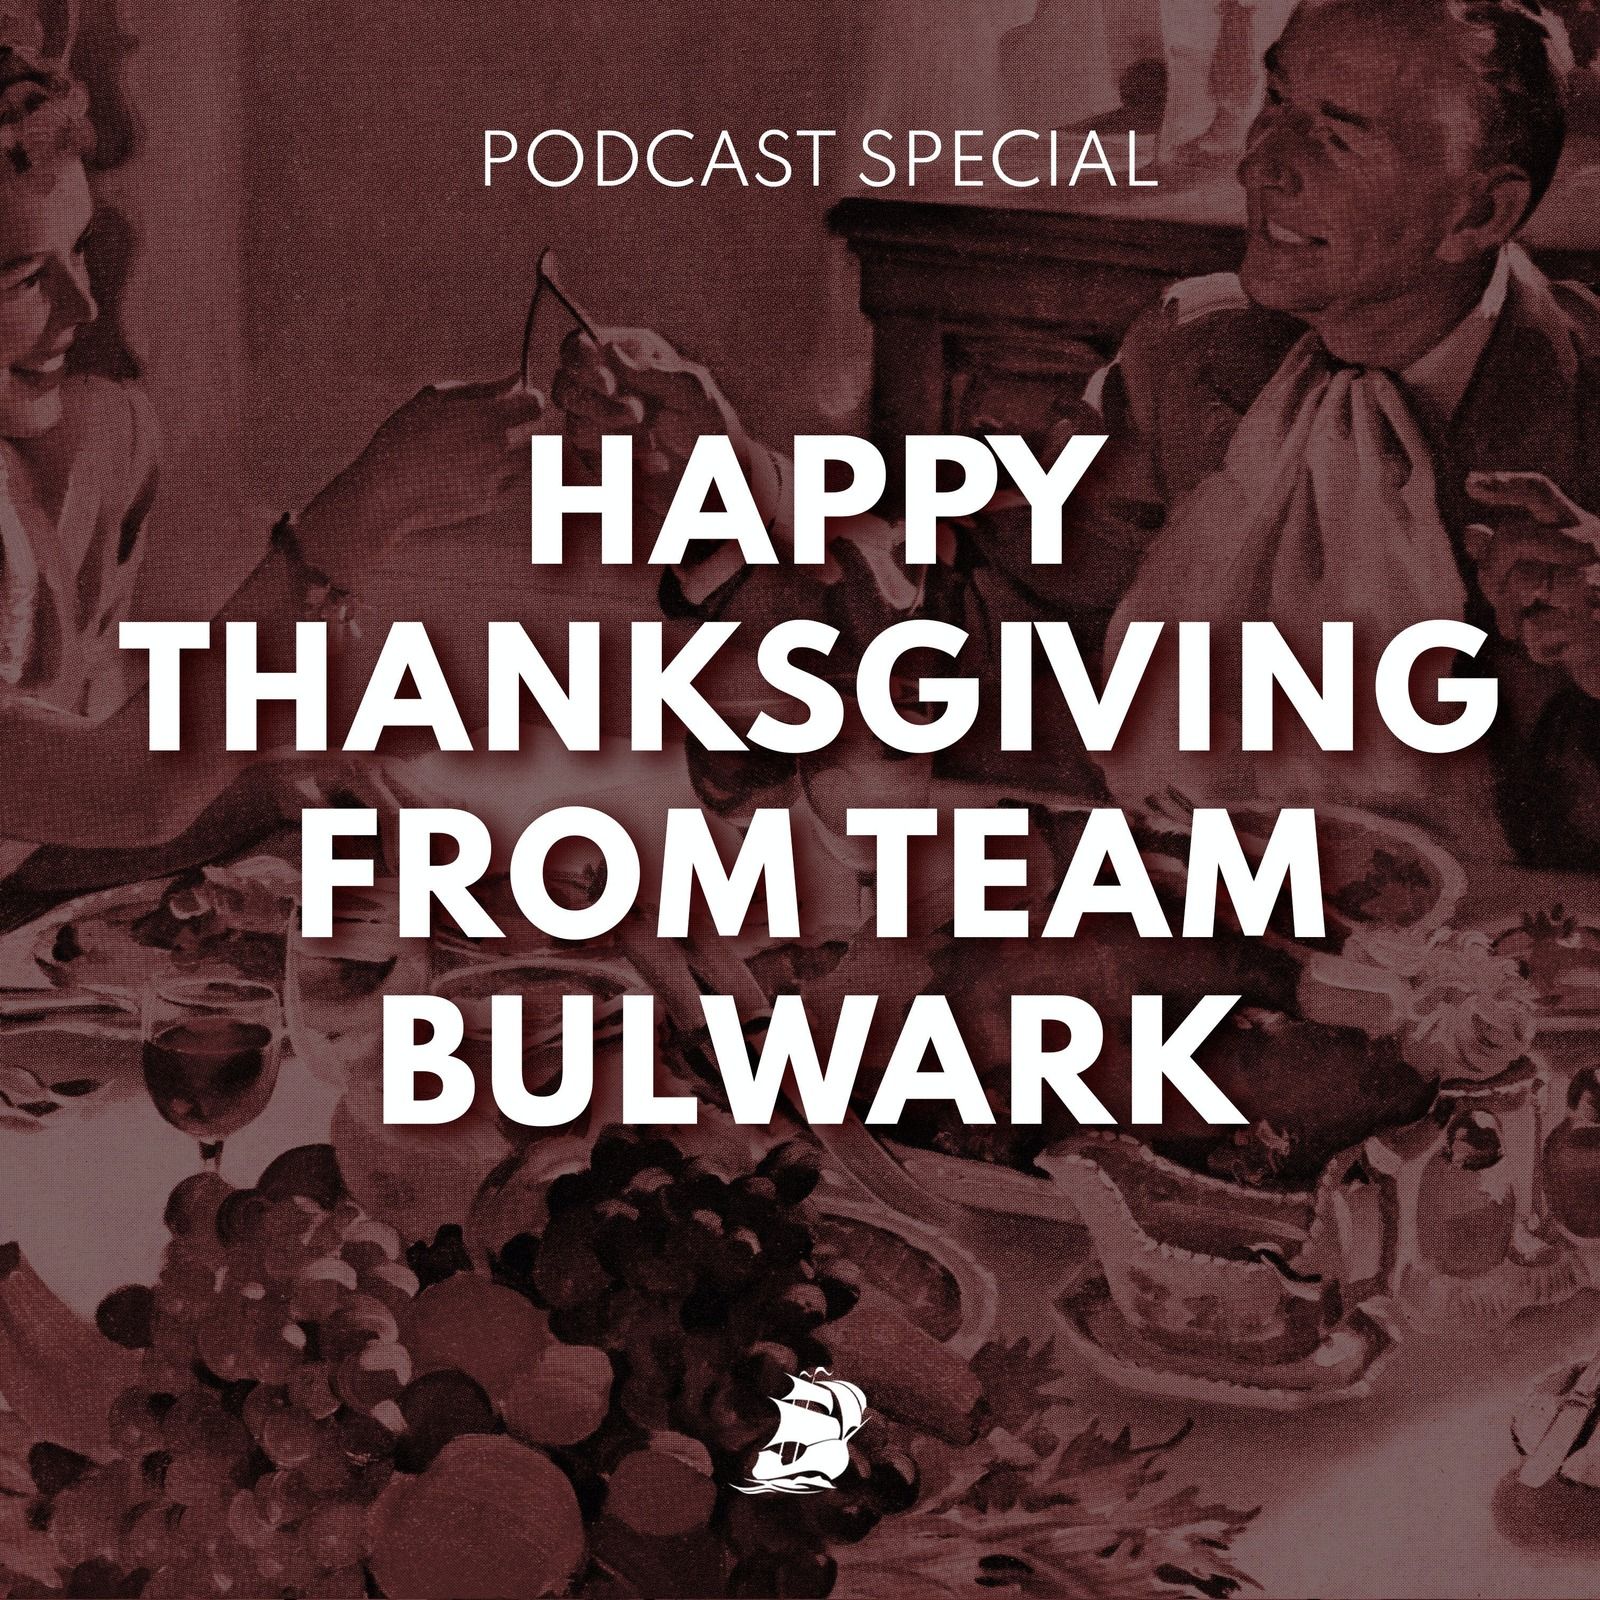  A Thanksgiving Message from Team Bulwark by The Bulwark Podcast